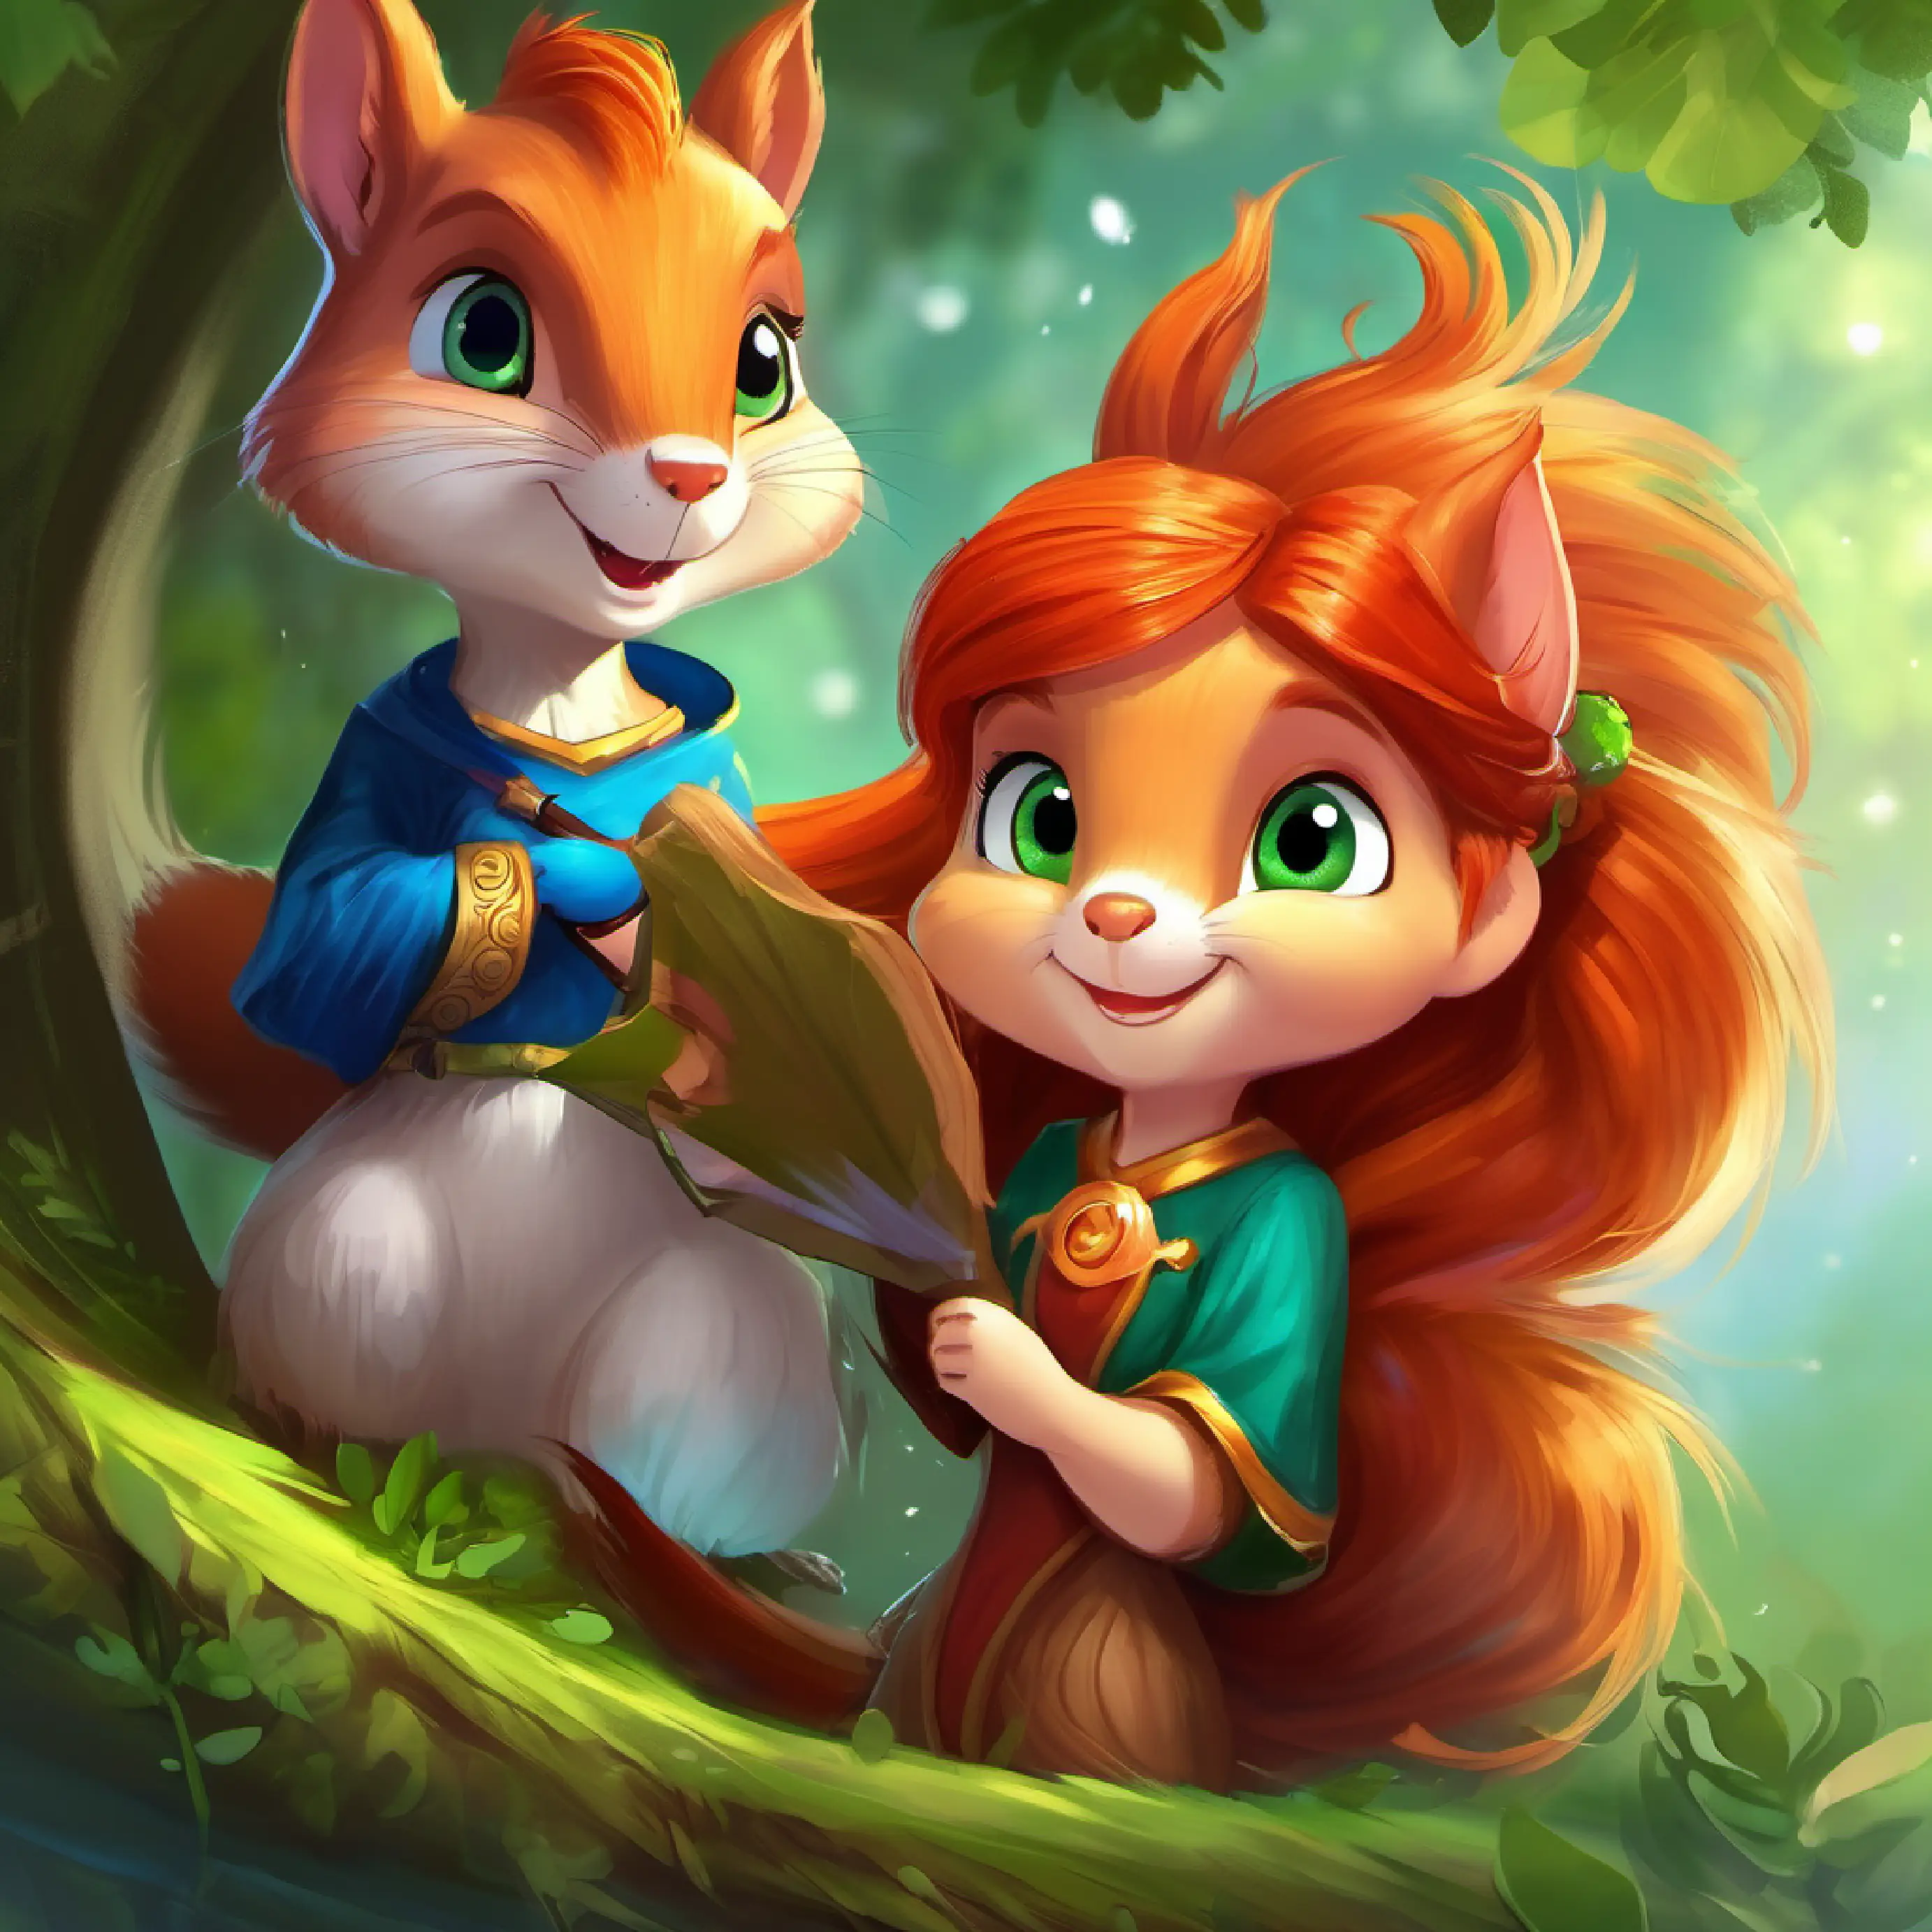 Introduction to Mischievous squirrel with bushy tail and bright, beady eyes and Princess Brave girl with freckles, green eyes, and wild red hair's favorite weapon